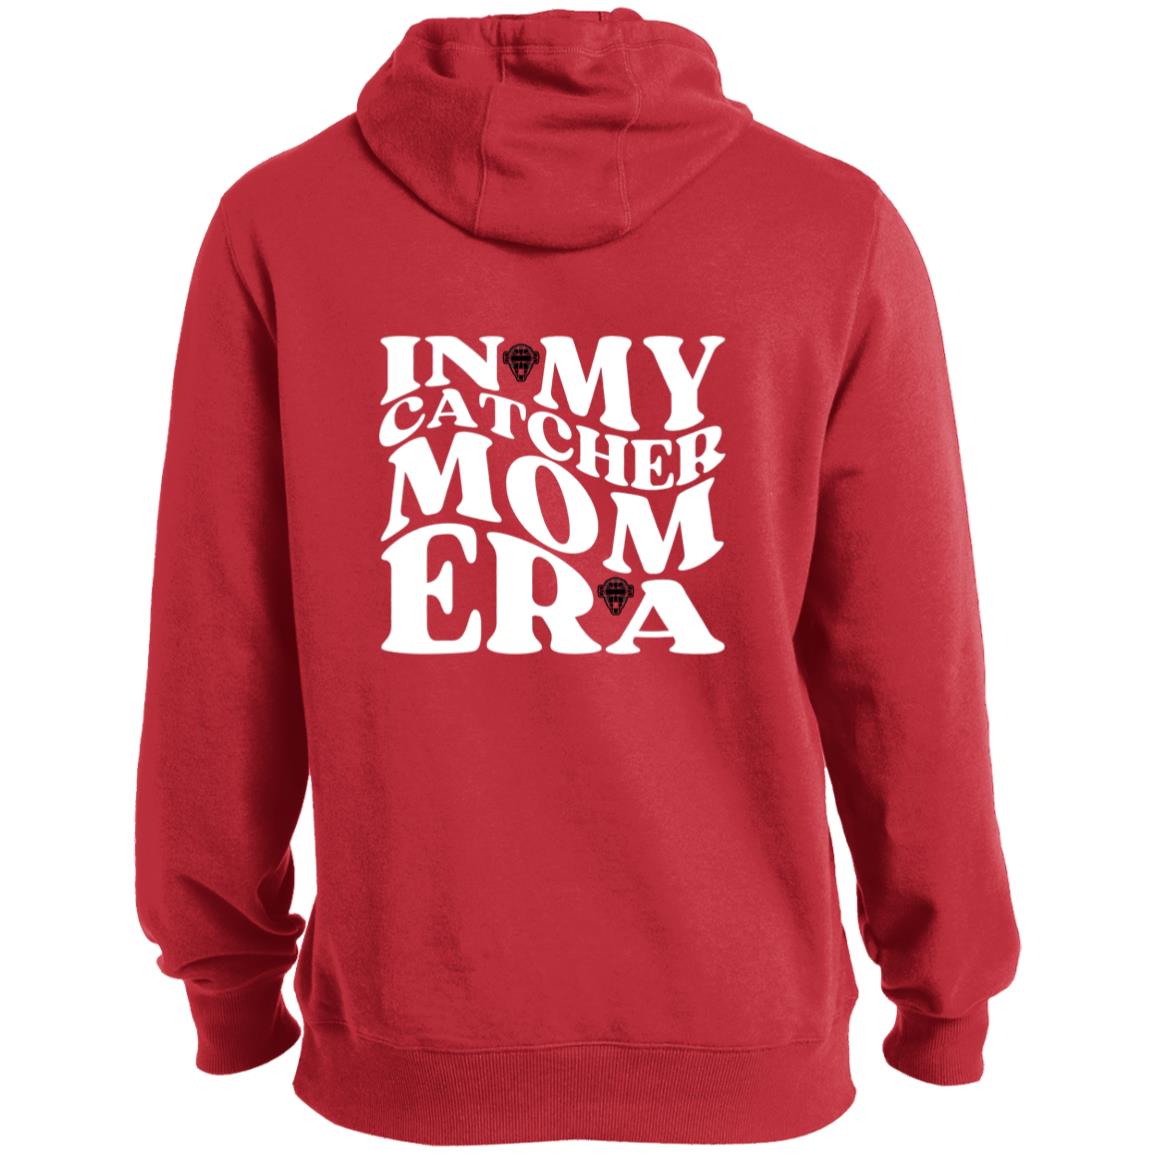 In My Catcher Mom Era Pullover Hoodie red back